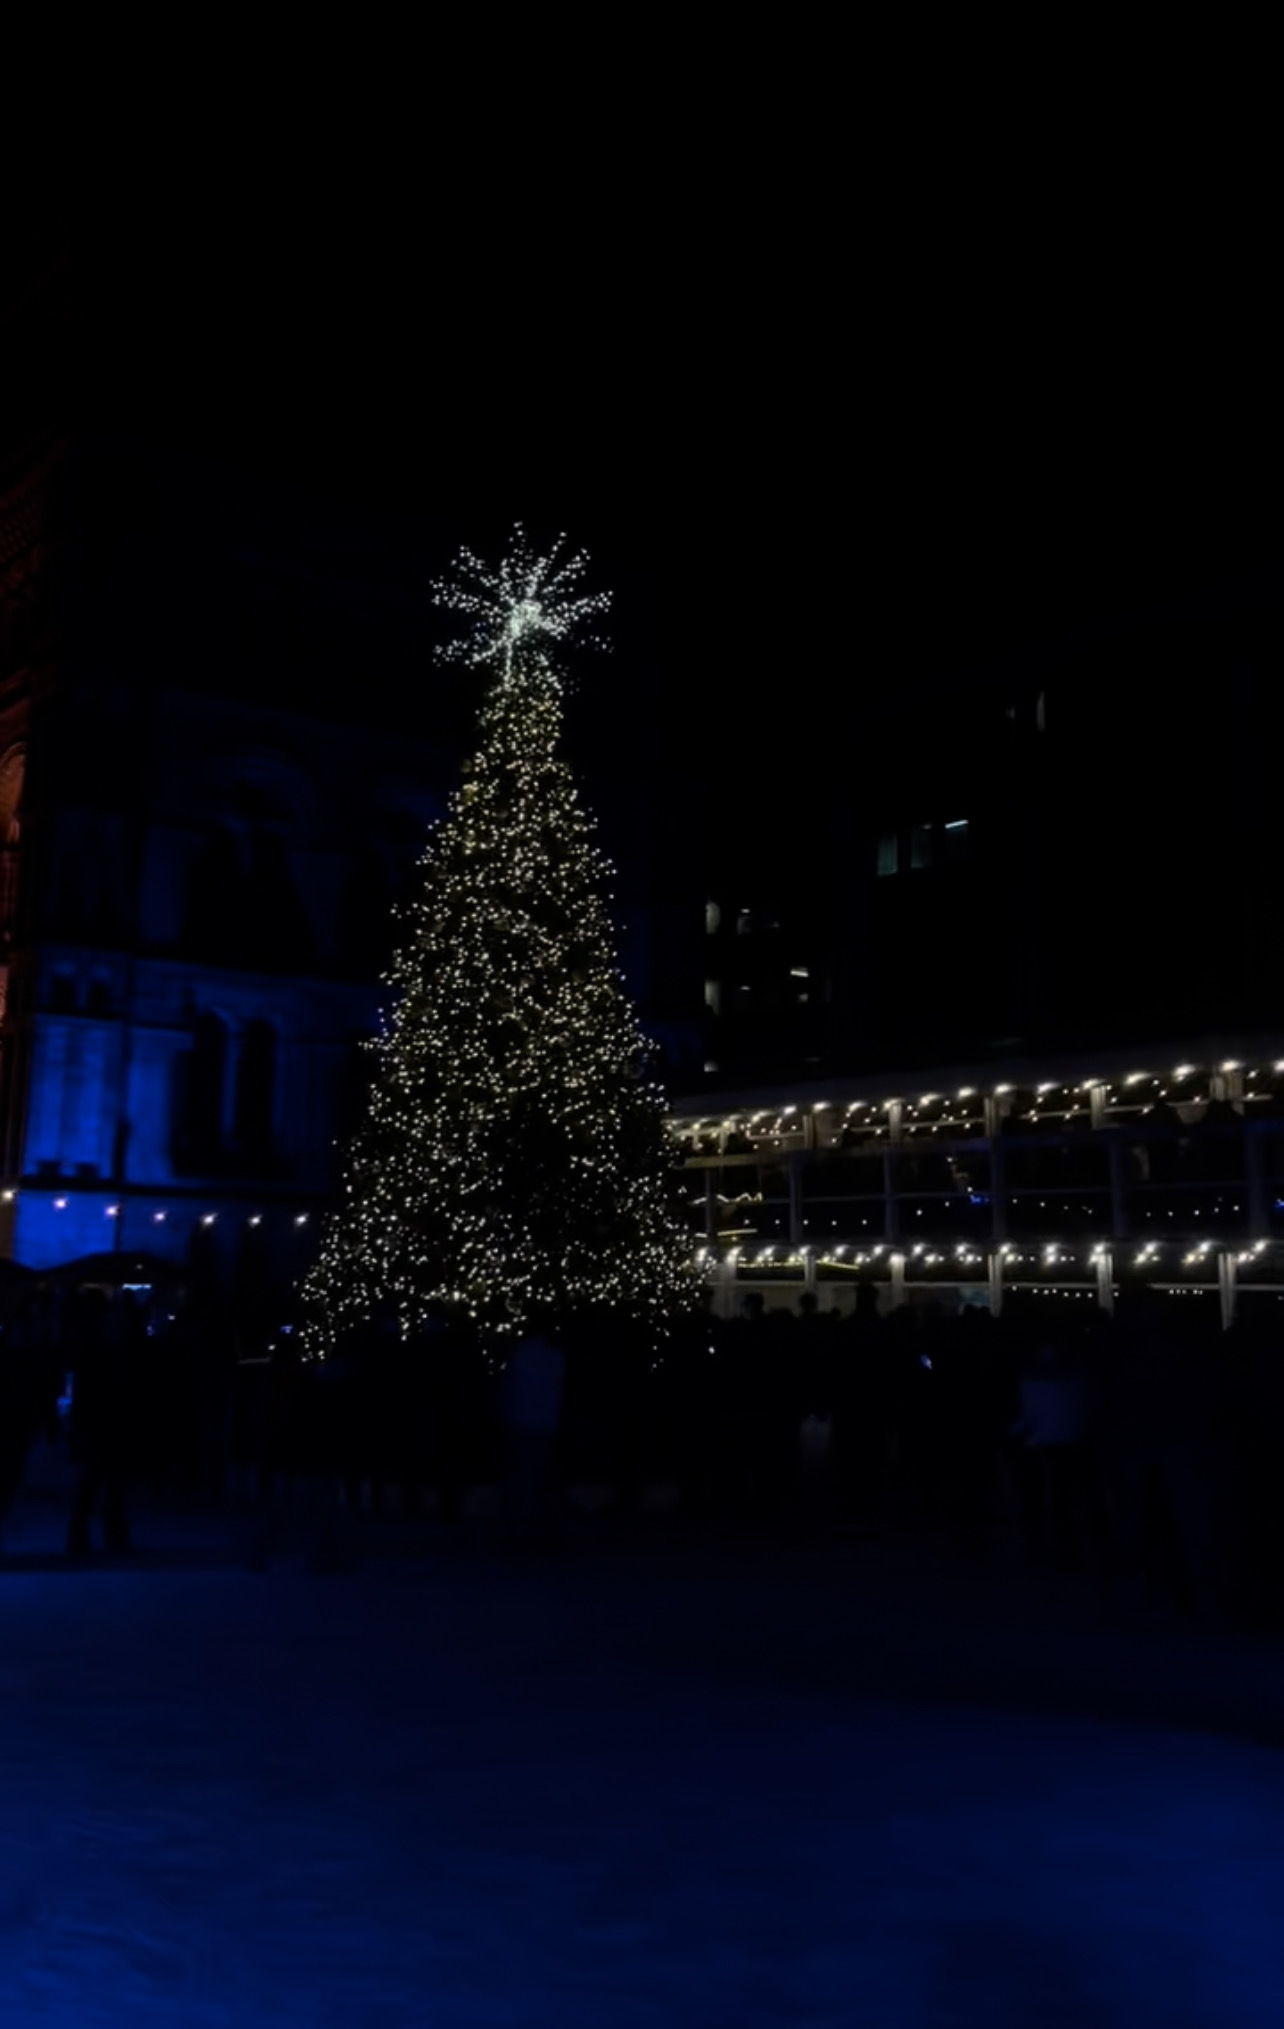 The Ice Skating Rink at the Natural History Museum with a Christmas tree in foreground illuminated at night